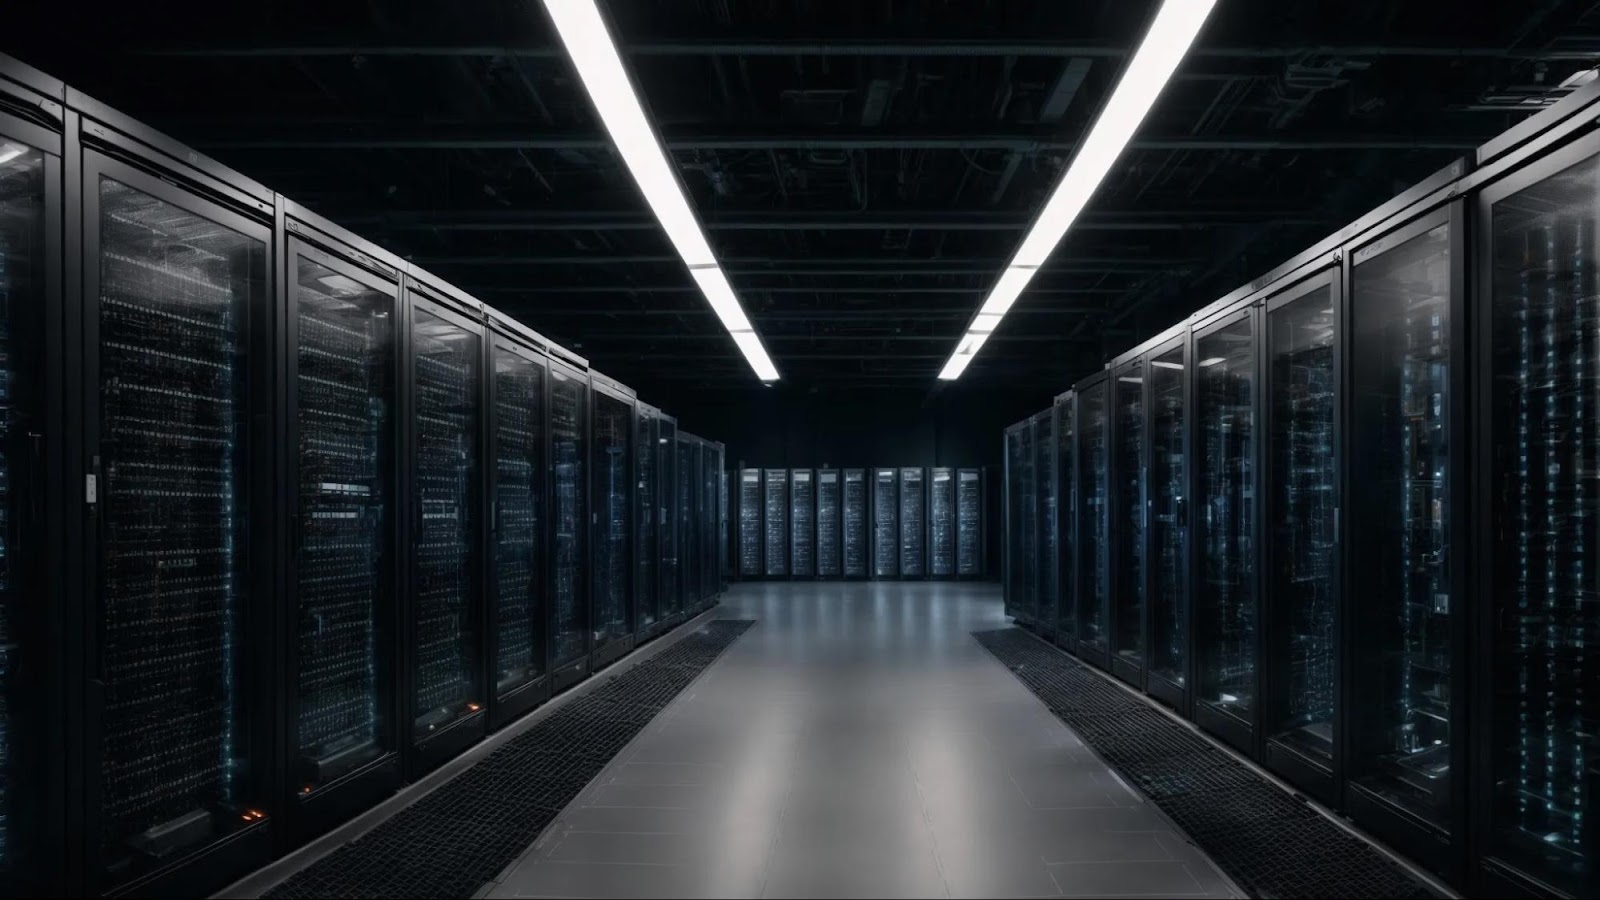 a vast server room with aisles of data storage units indicating the infrastructure for scalable web hosting.